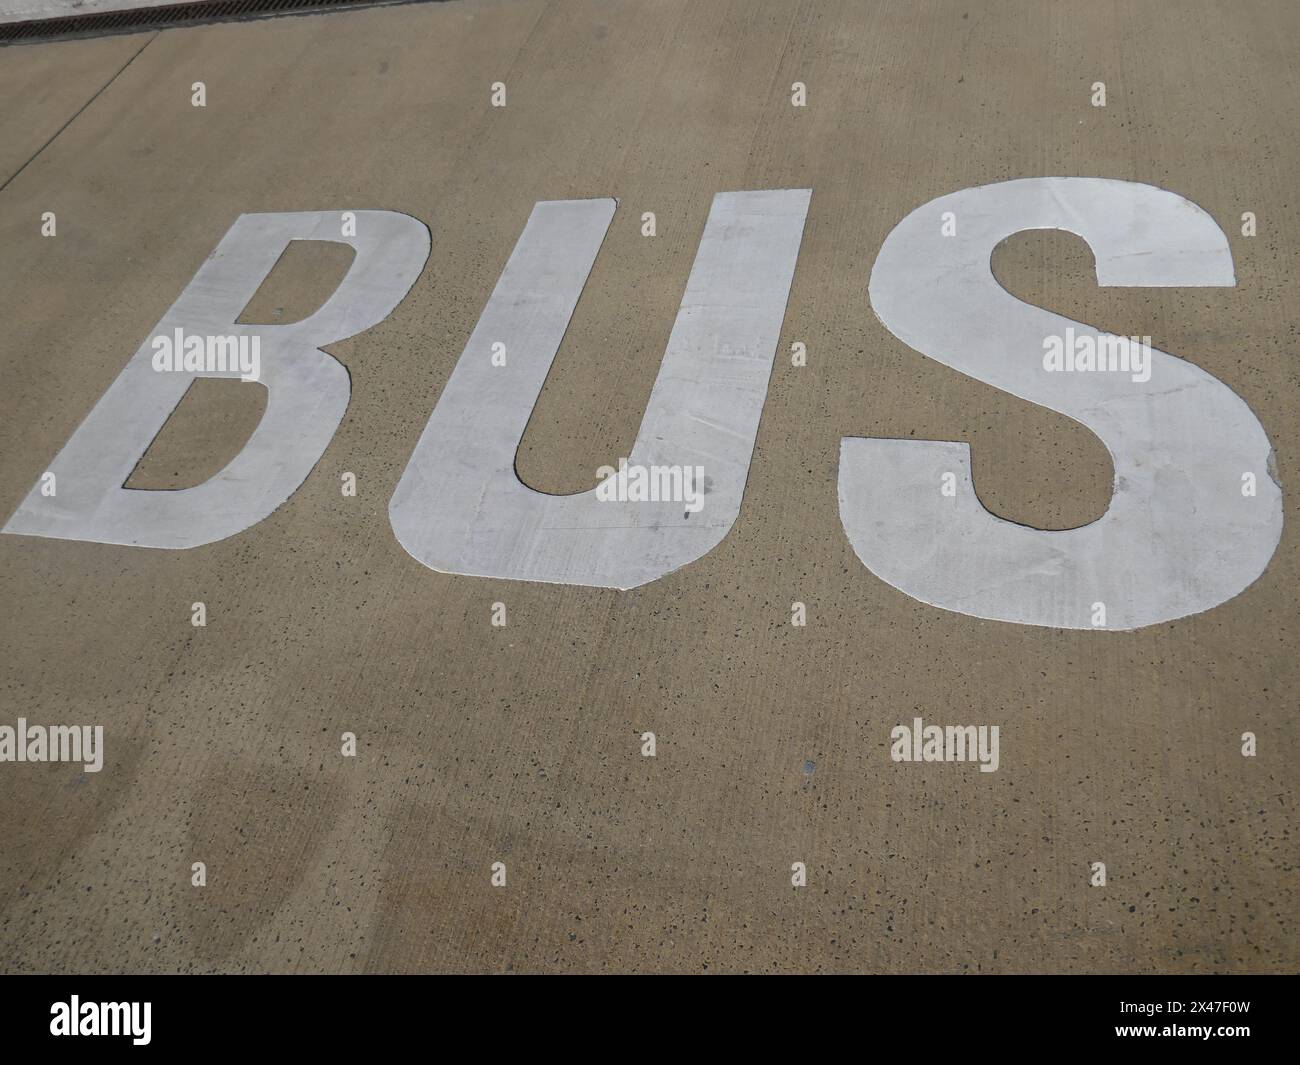 Bus sign painted on asphalt road surface Stock Photo